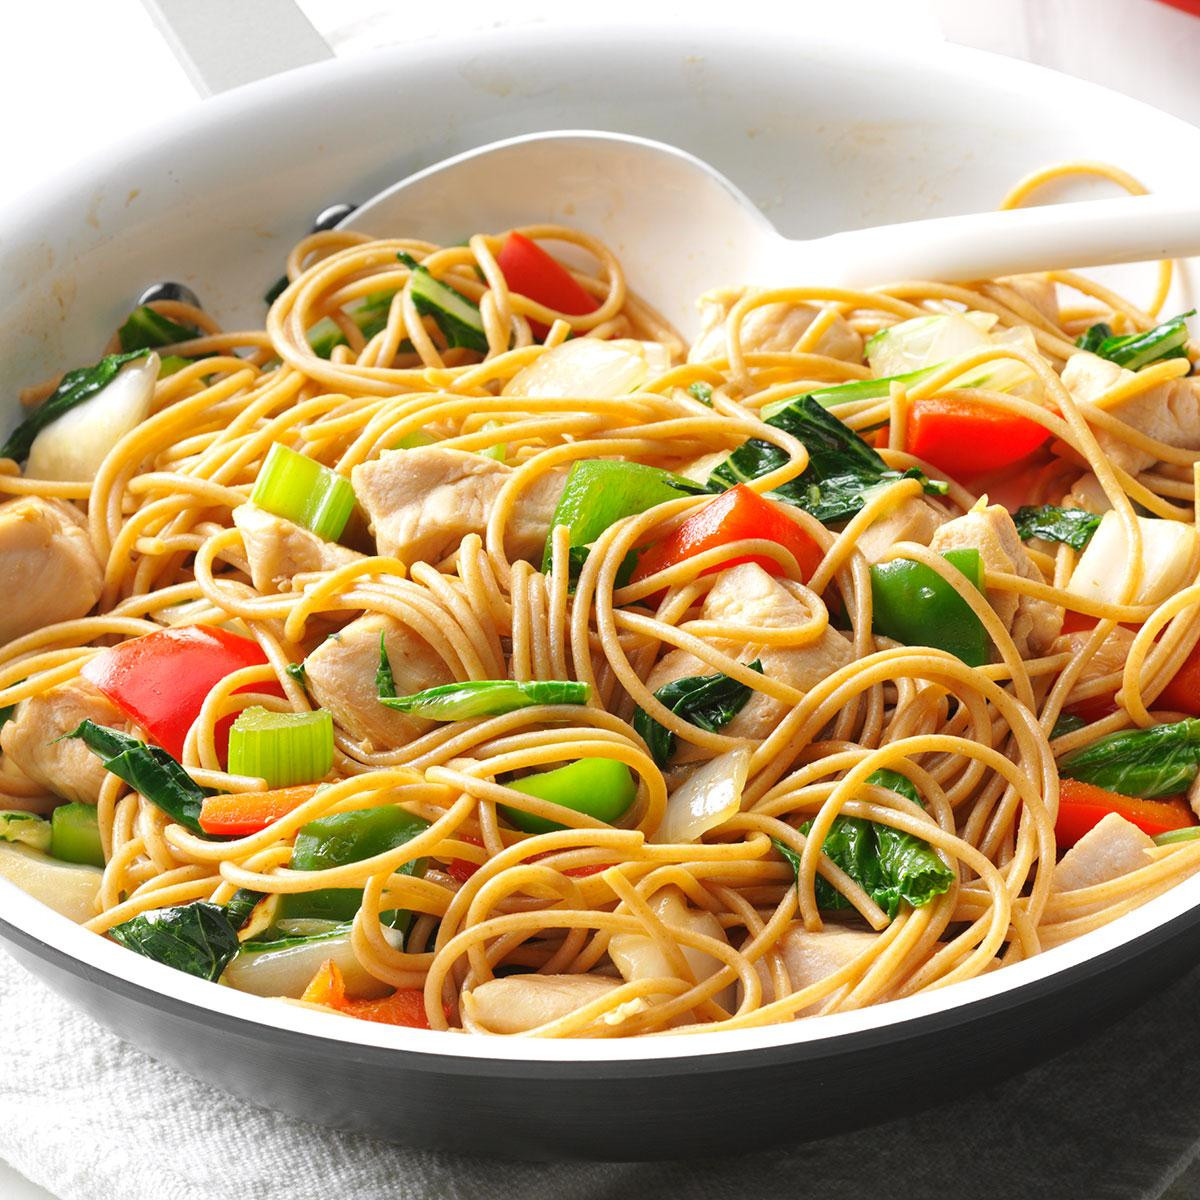 Chicken Stir-Fry With Noodles
 Chicken Stir Fry with Noodles Recipe